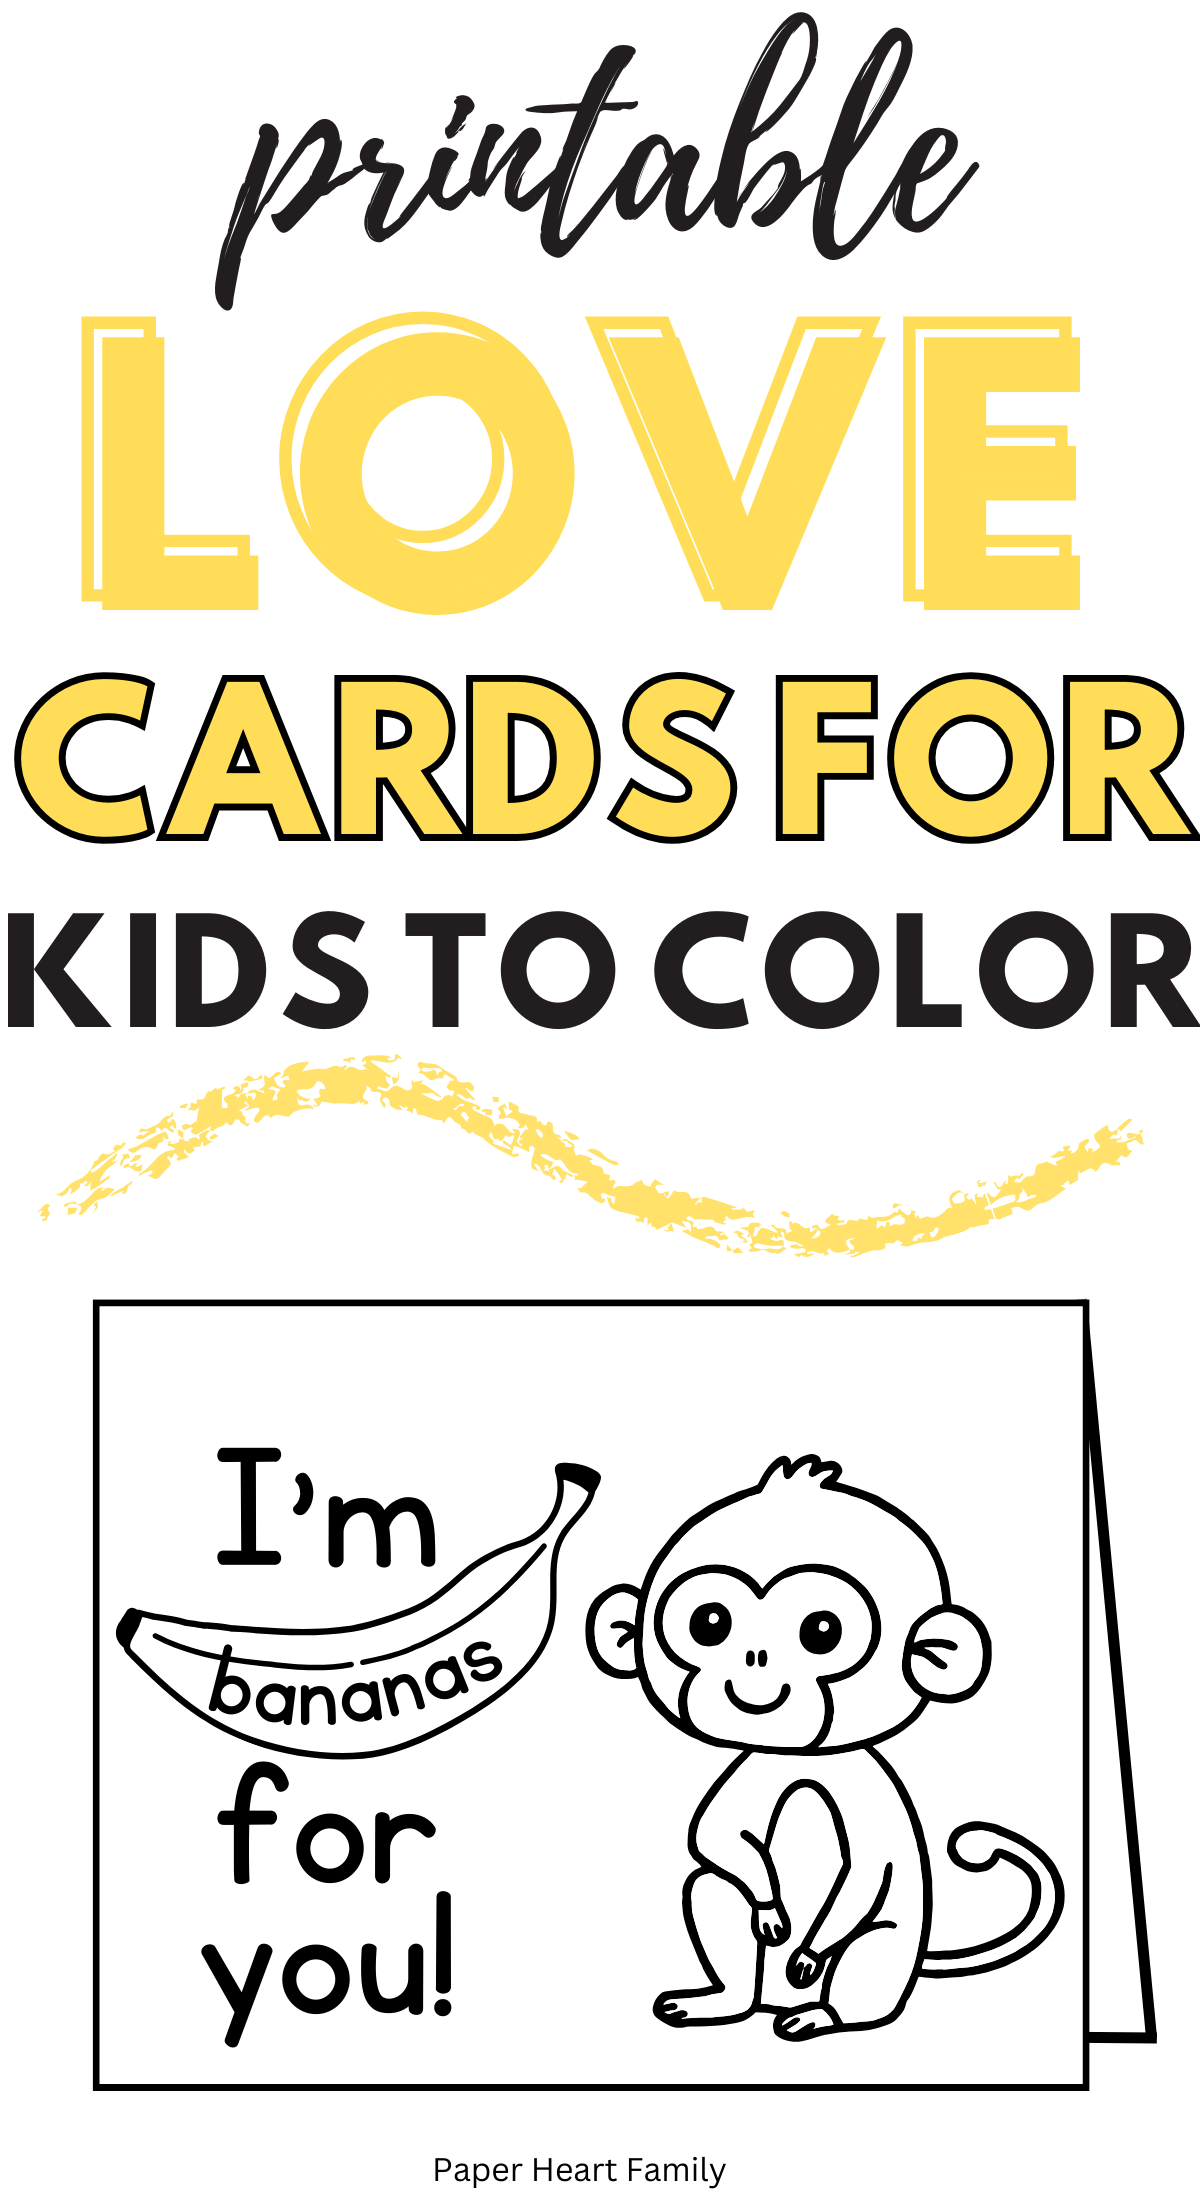 Card with a monkey and a banana that says "I'm bananas for you"